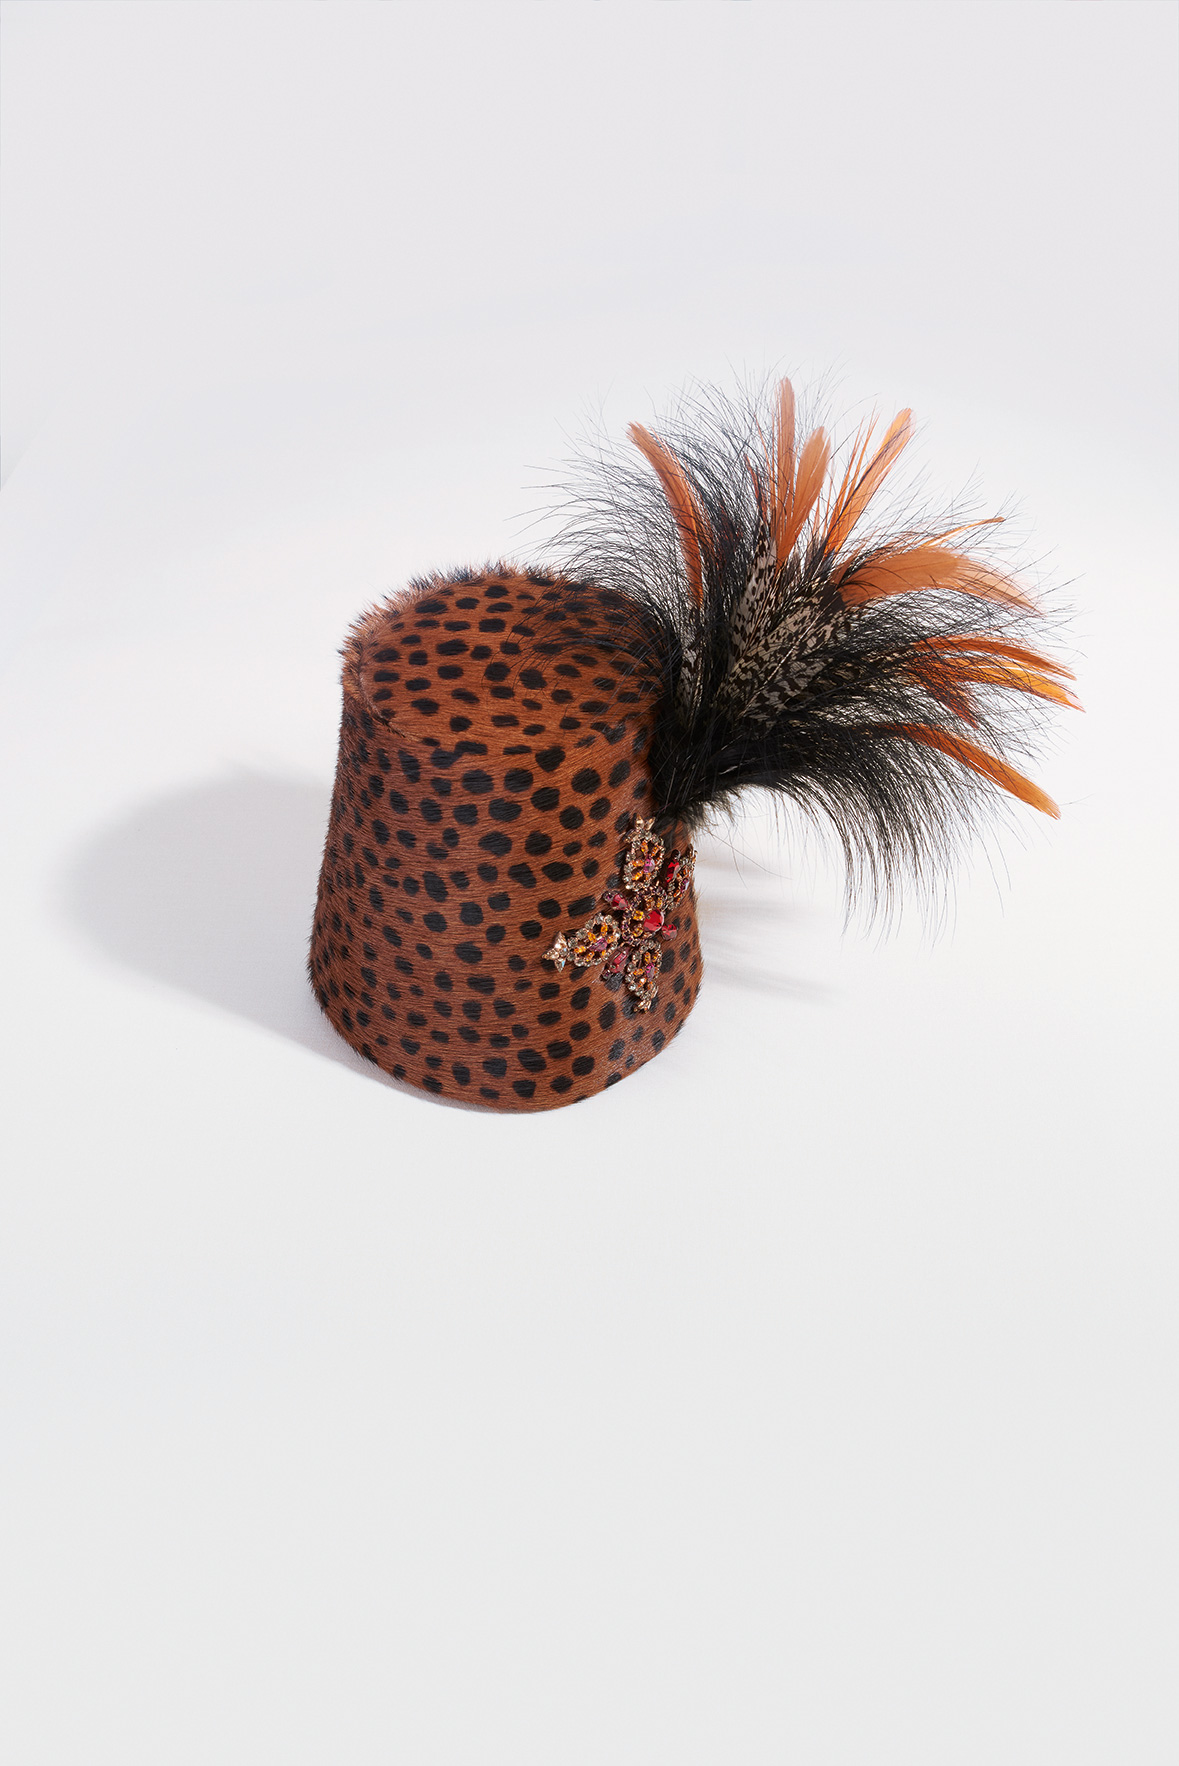 Fez made of printed foal leather with feathers pinned in place by a multicoloured diamanté brooch (made by Sabbagh), Autumn/Winter 1992 haute couture collection